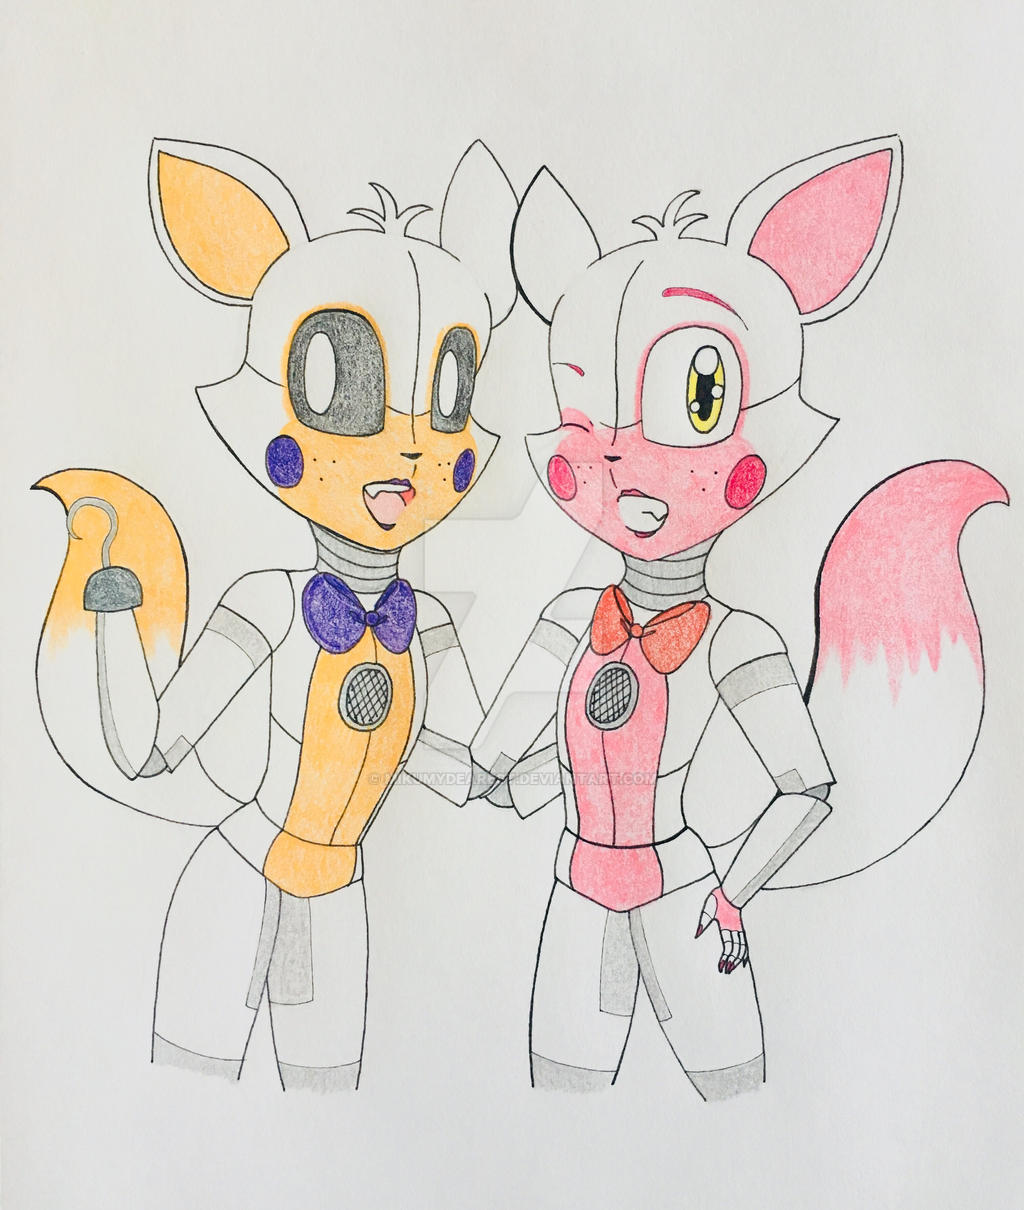 Funtime Foxy and Funtime Lolbit by FTThienAn on DeviantArt